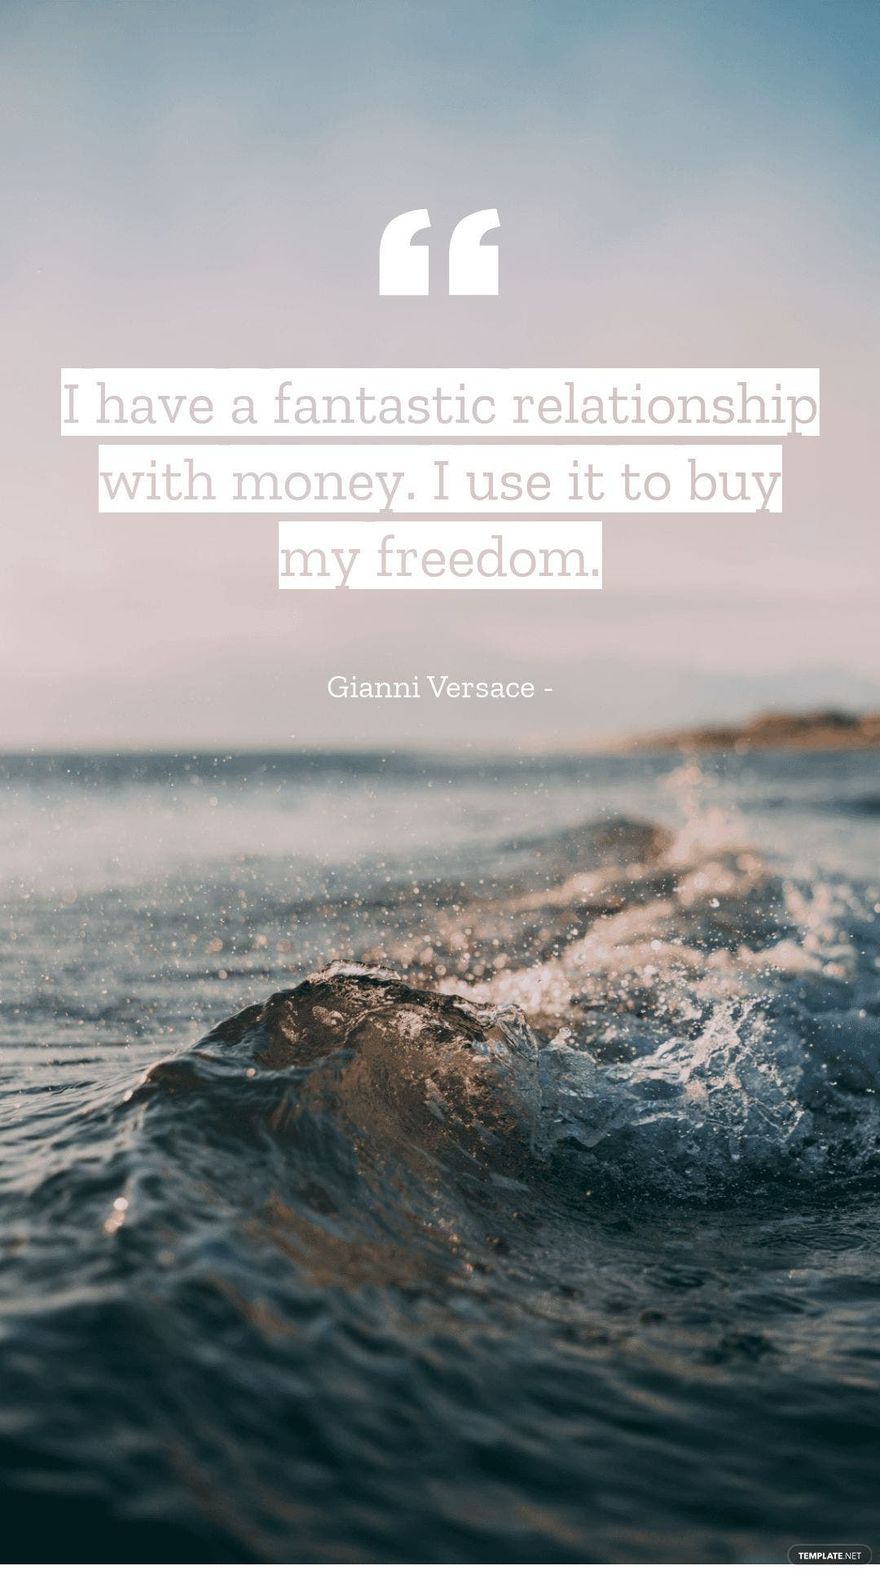 Gianni Versace - I have a fantastic relationship with money. I use it to buy my freedom.